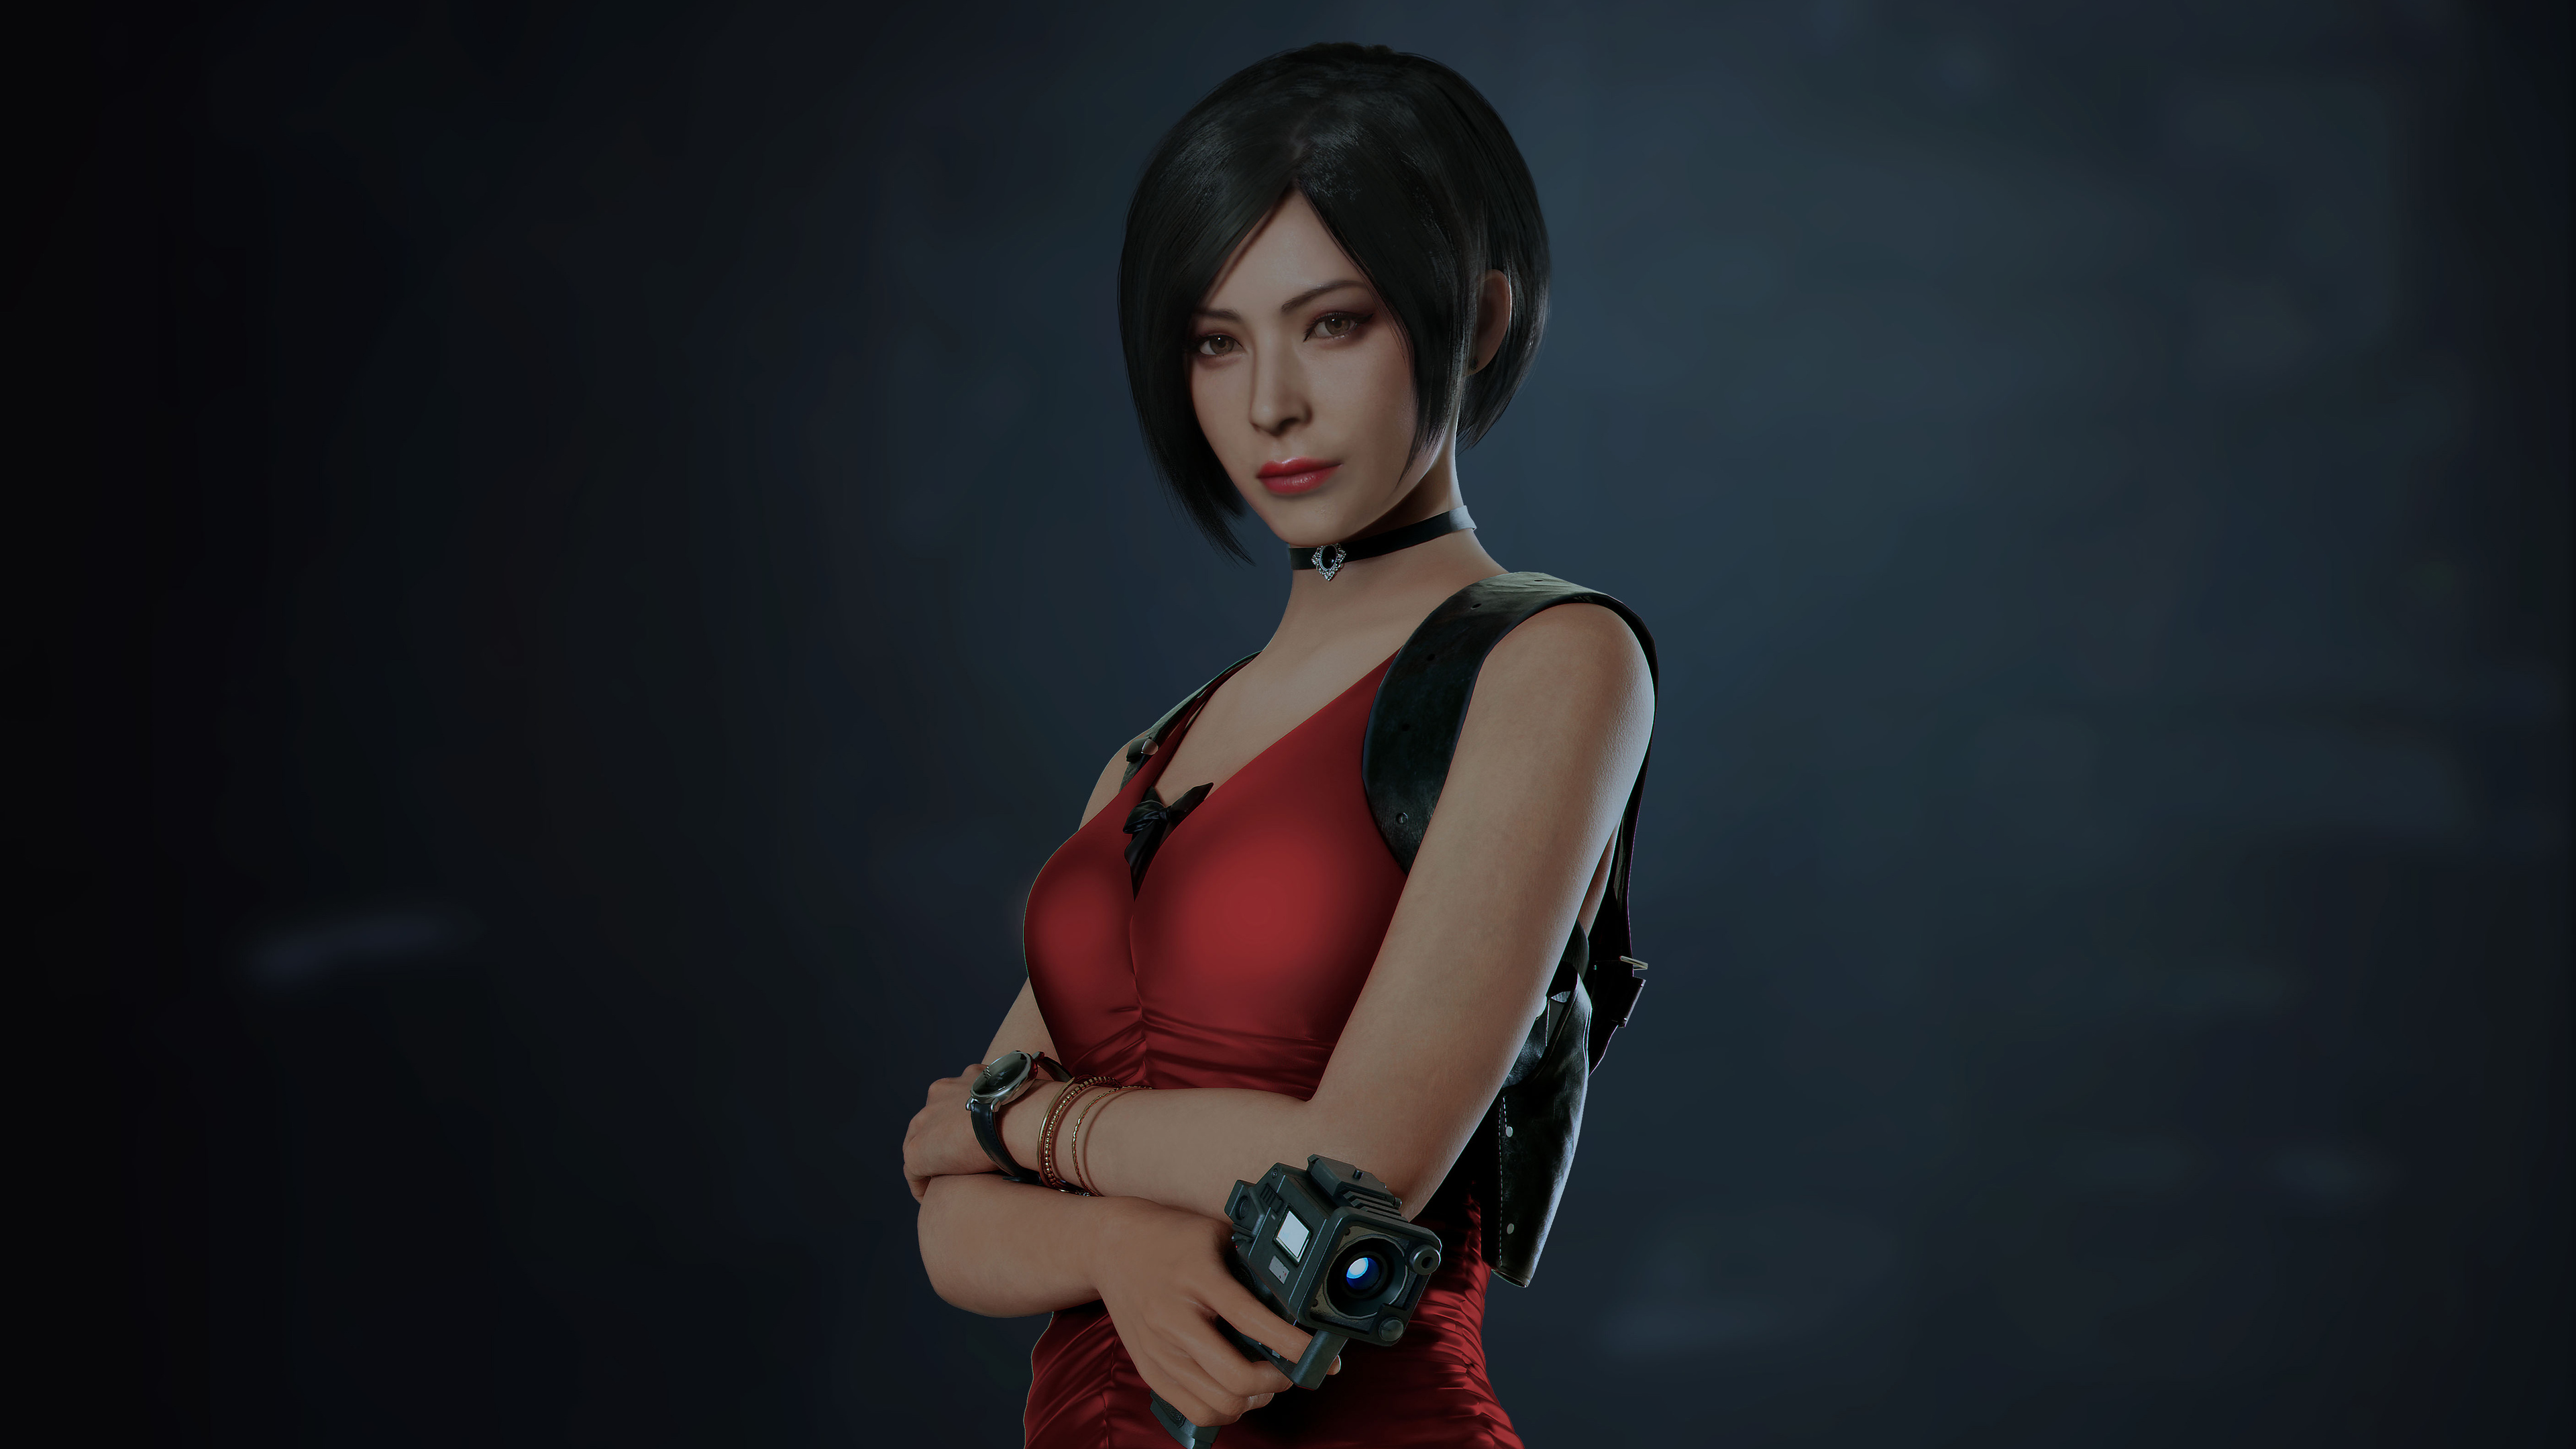 ada wong resident evil 2 4k 1545589710 - Ada Wong Resident Evil 2 4k - resident evil 2 wallpapers, hd-wallpapers, games wallpapers, fantasy girls wallpapers, 4k-wallpapers, 2019 games wallpapers